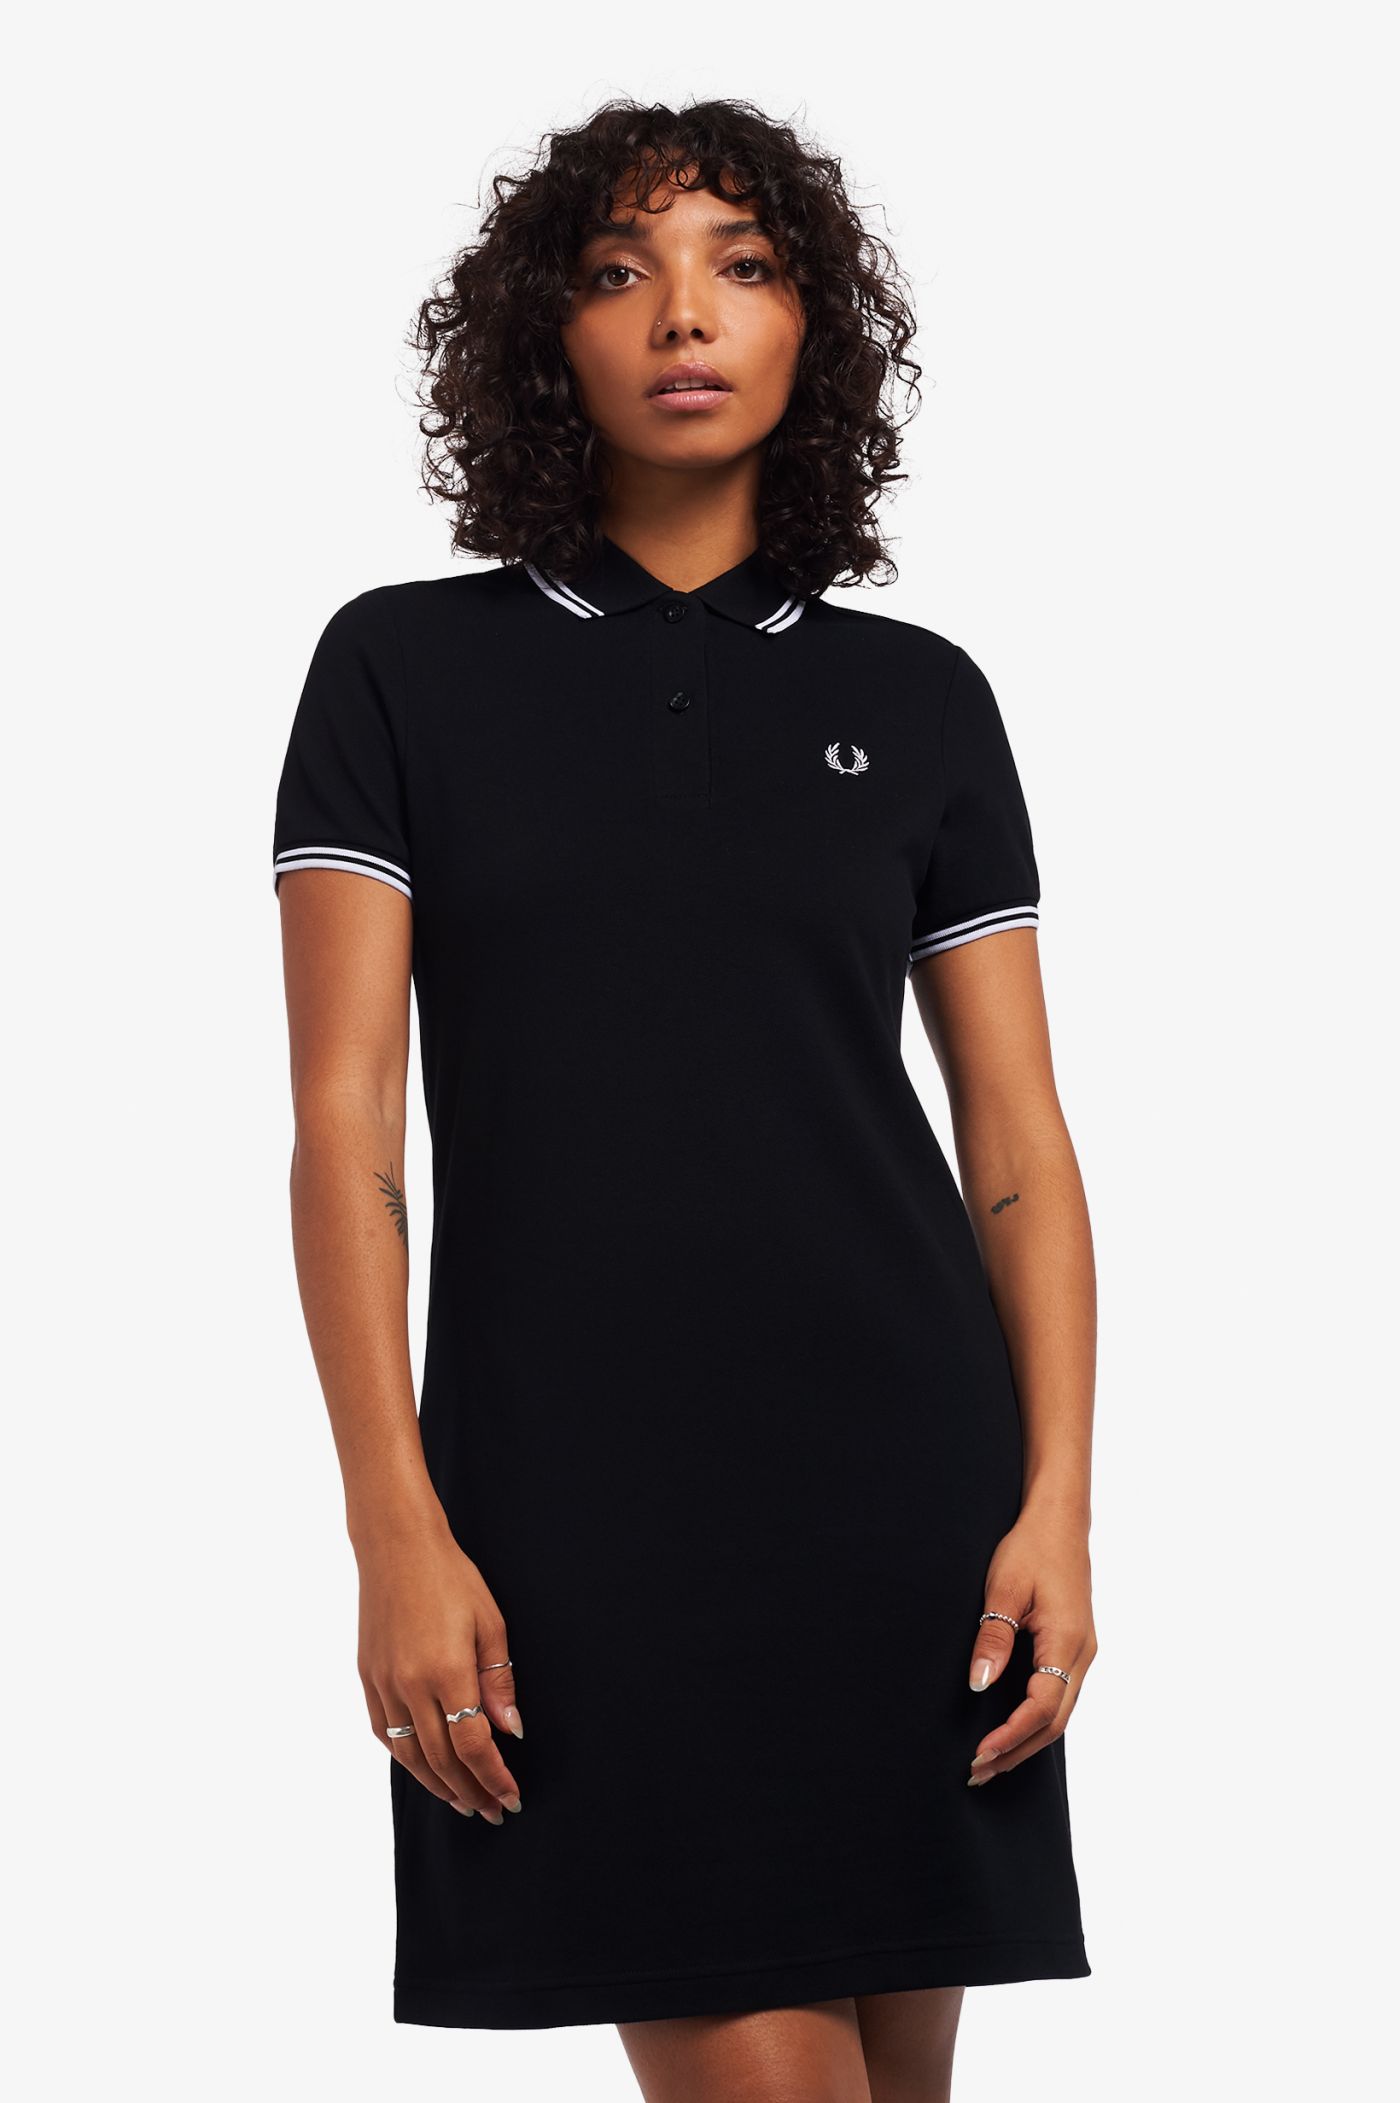 Twin Tipped Fred Perry Dress - Black / White / White | Women's